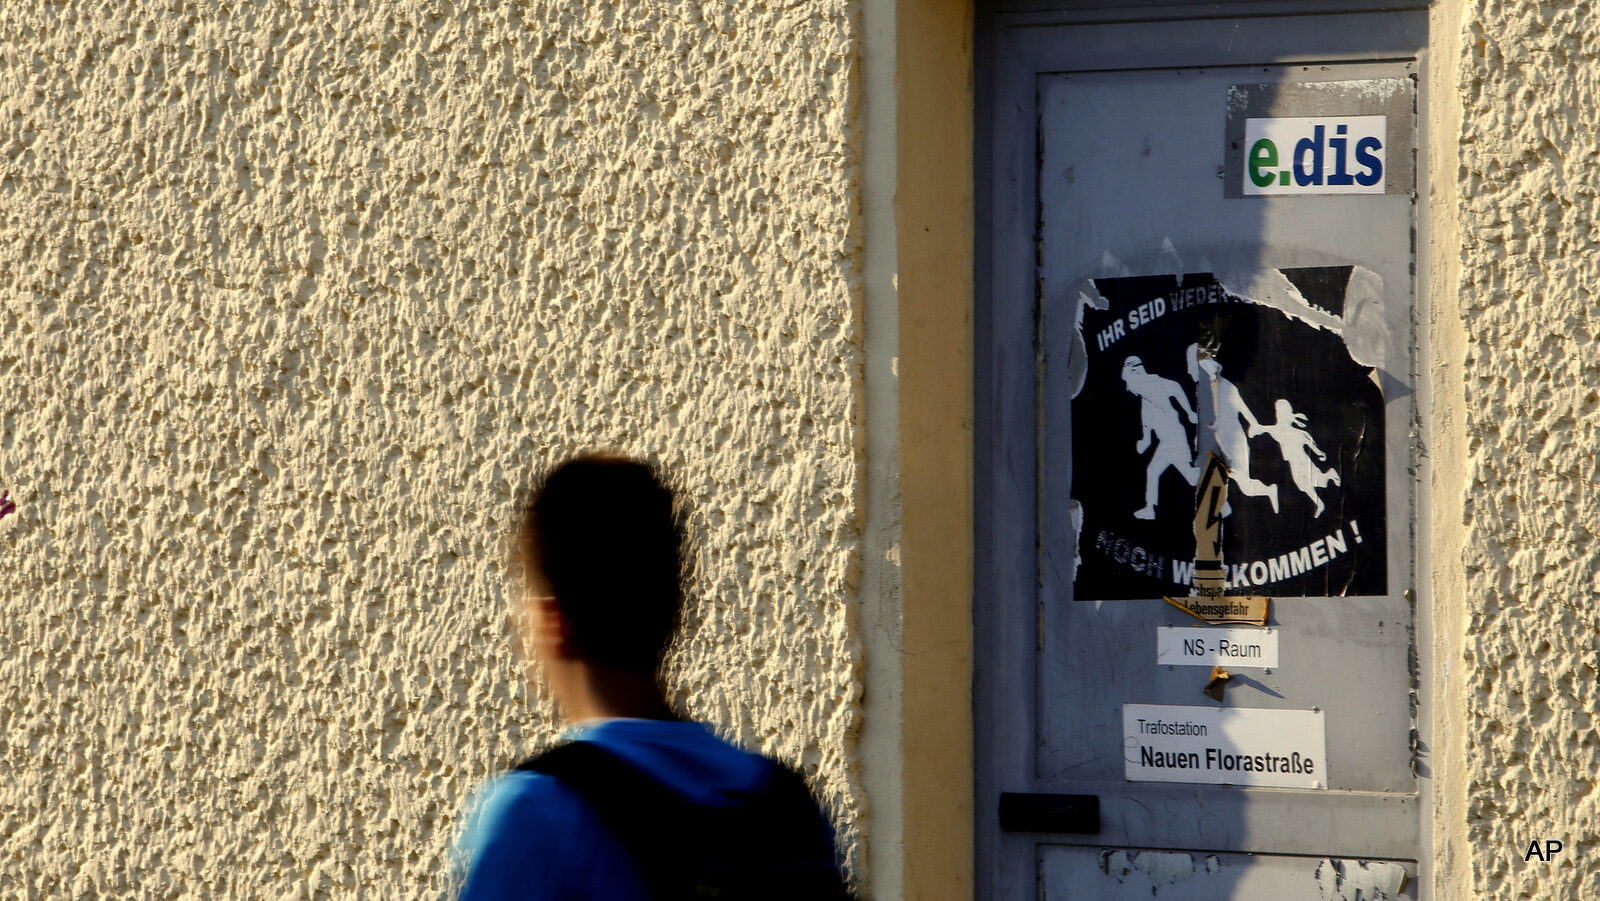 In Aug. 11, 2015 photo a boy walks past a torn poster "You are neither refugees nor are you welcome" in Nauen, eastern Germany. An initiative "Nein zum Heim" (No to the (refugee) home) protests against a planned shelter for asylum seekers. The starkly differing reactions to the influx of refugees points to an increasing polarization in Germany, with growing acceptance of outsiders by a majority but a persistent and possibly radicalized minority fearful of all things foreign.